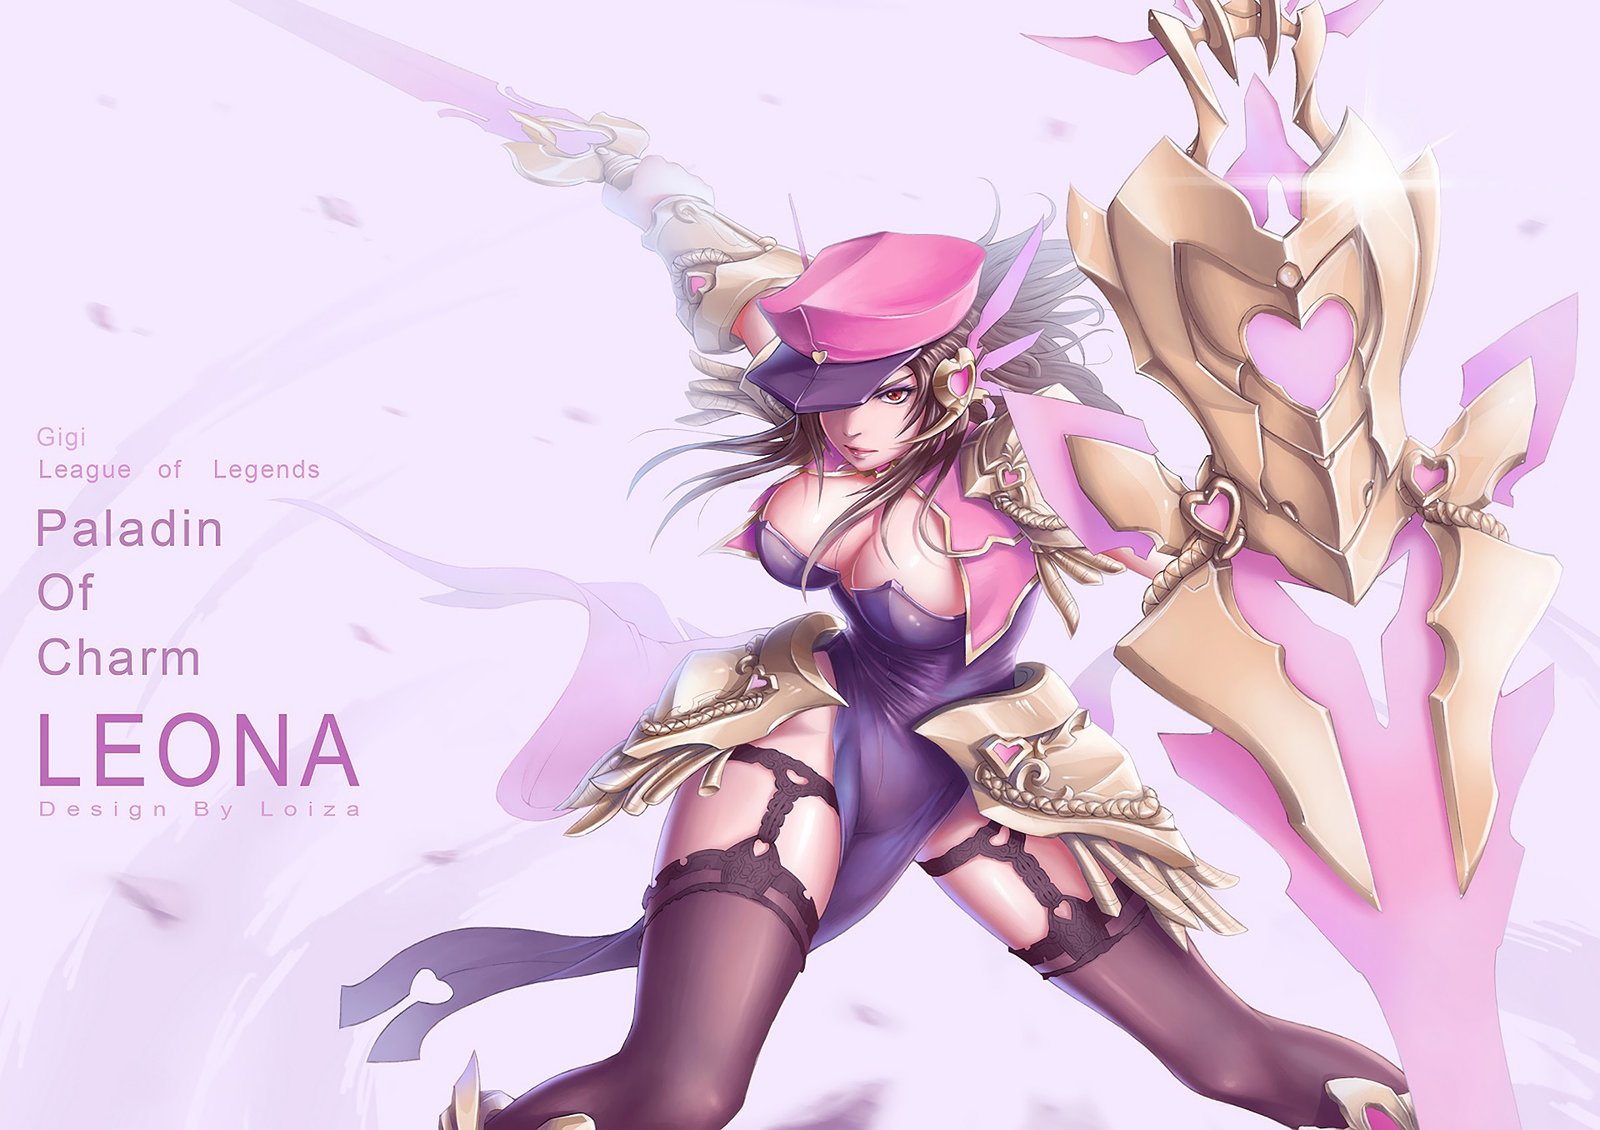 Popstar Leona Skin Concept Wallpapers And Fan Arts League Of Legends Lol Stats